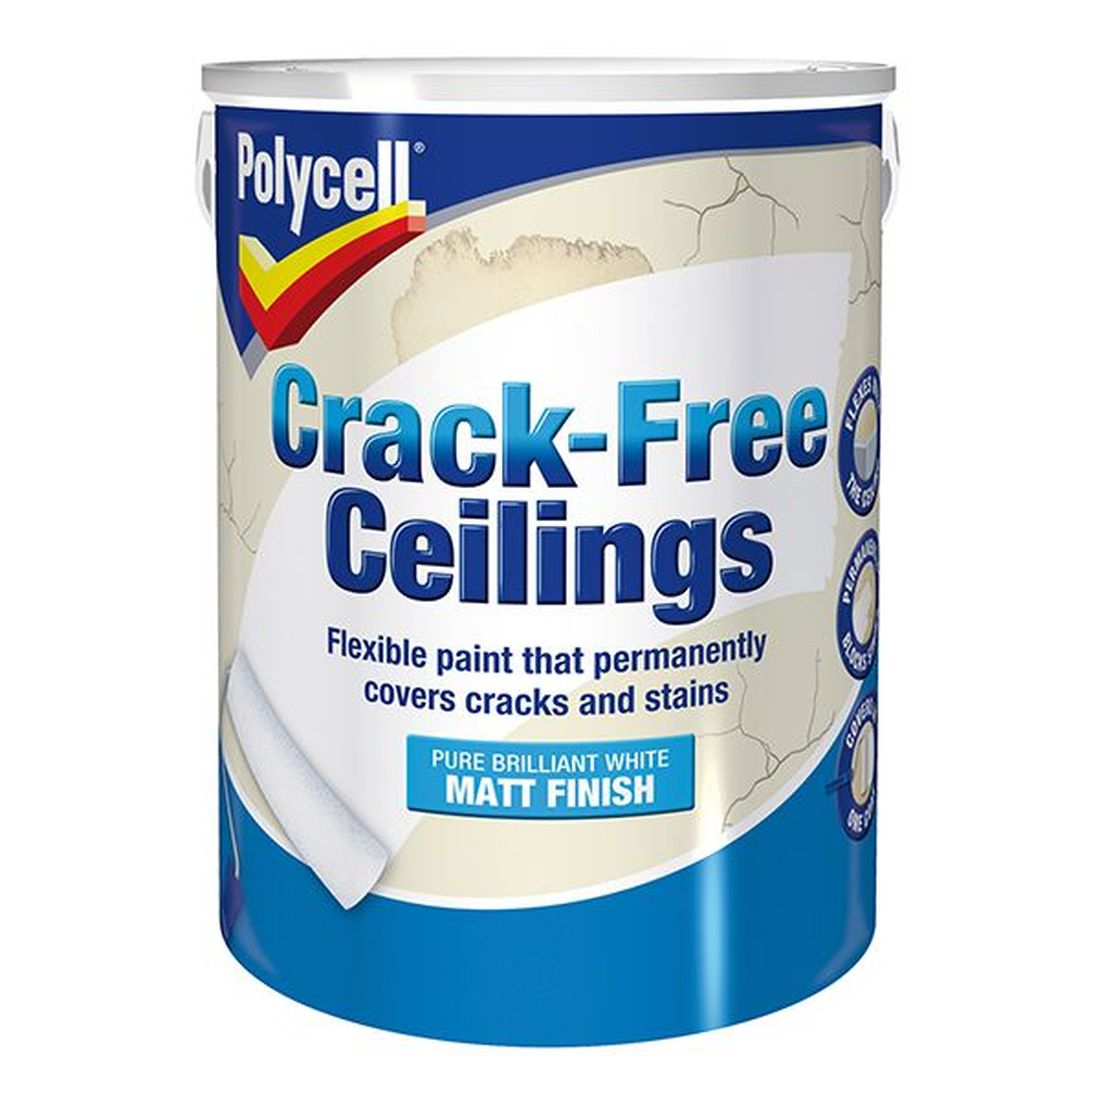 Polycell Crack-Free Ceilings Smooth Matt 5 litre                                         